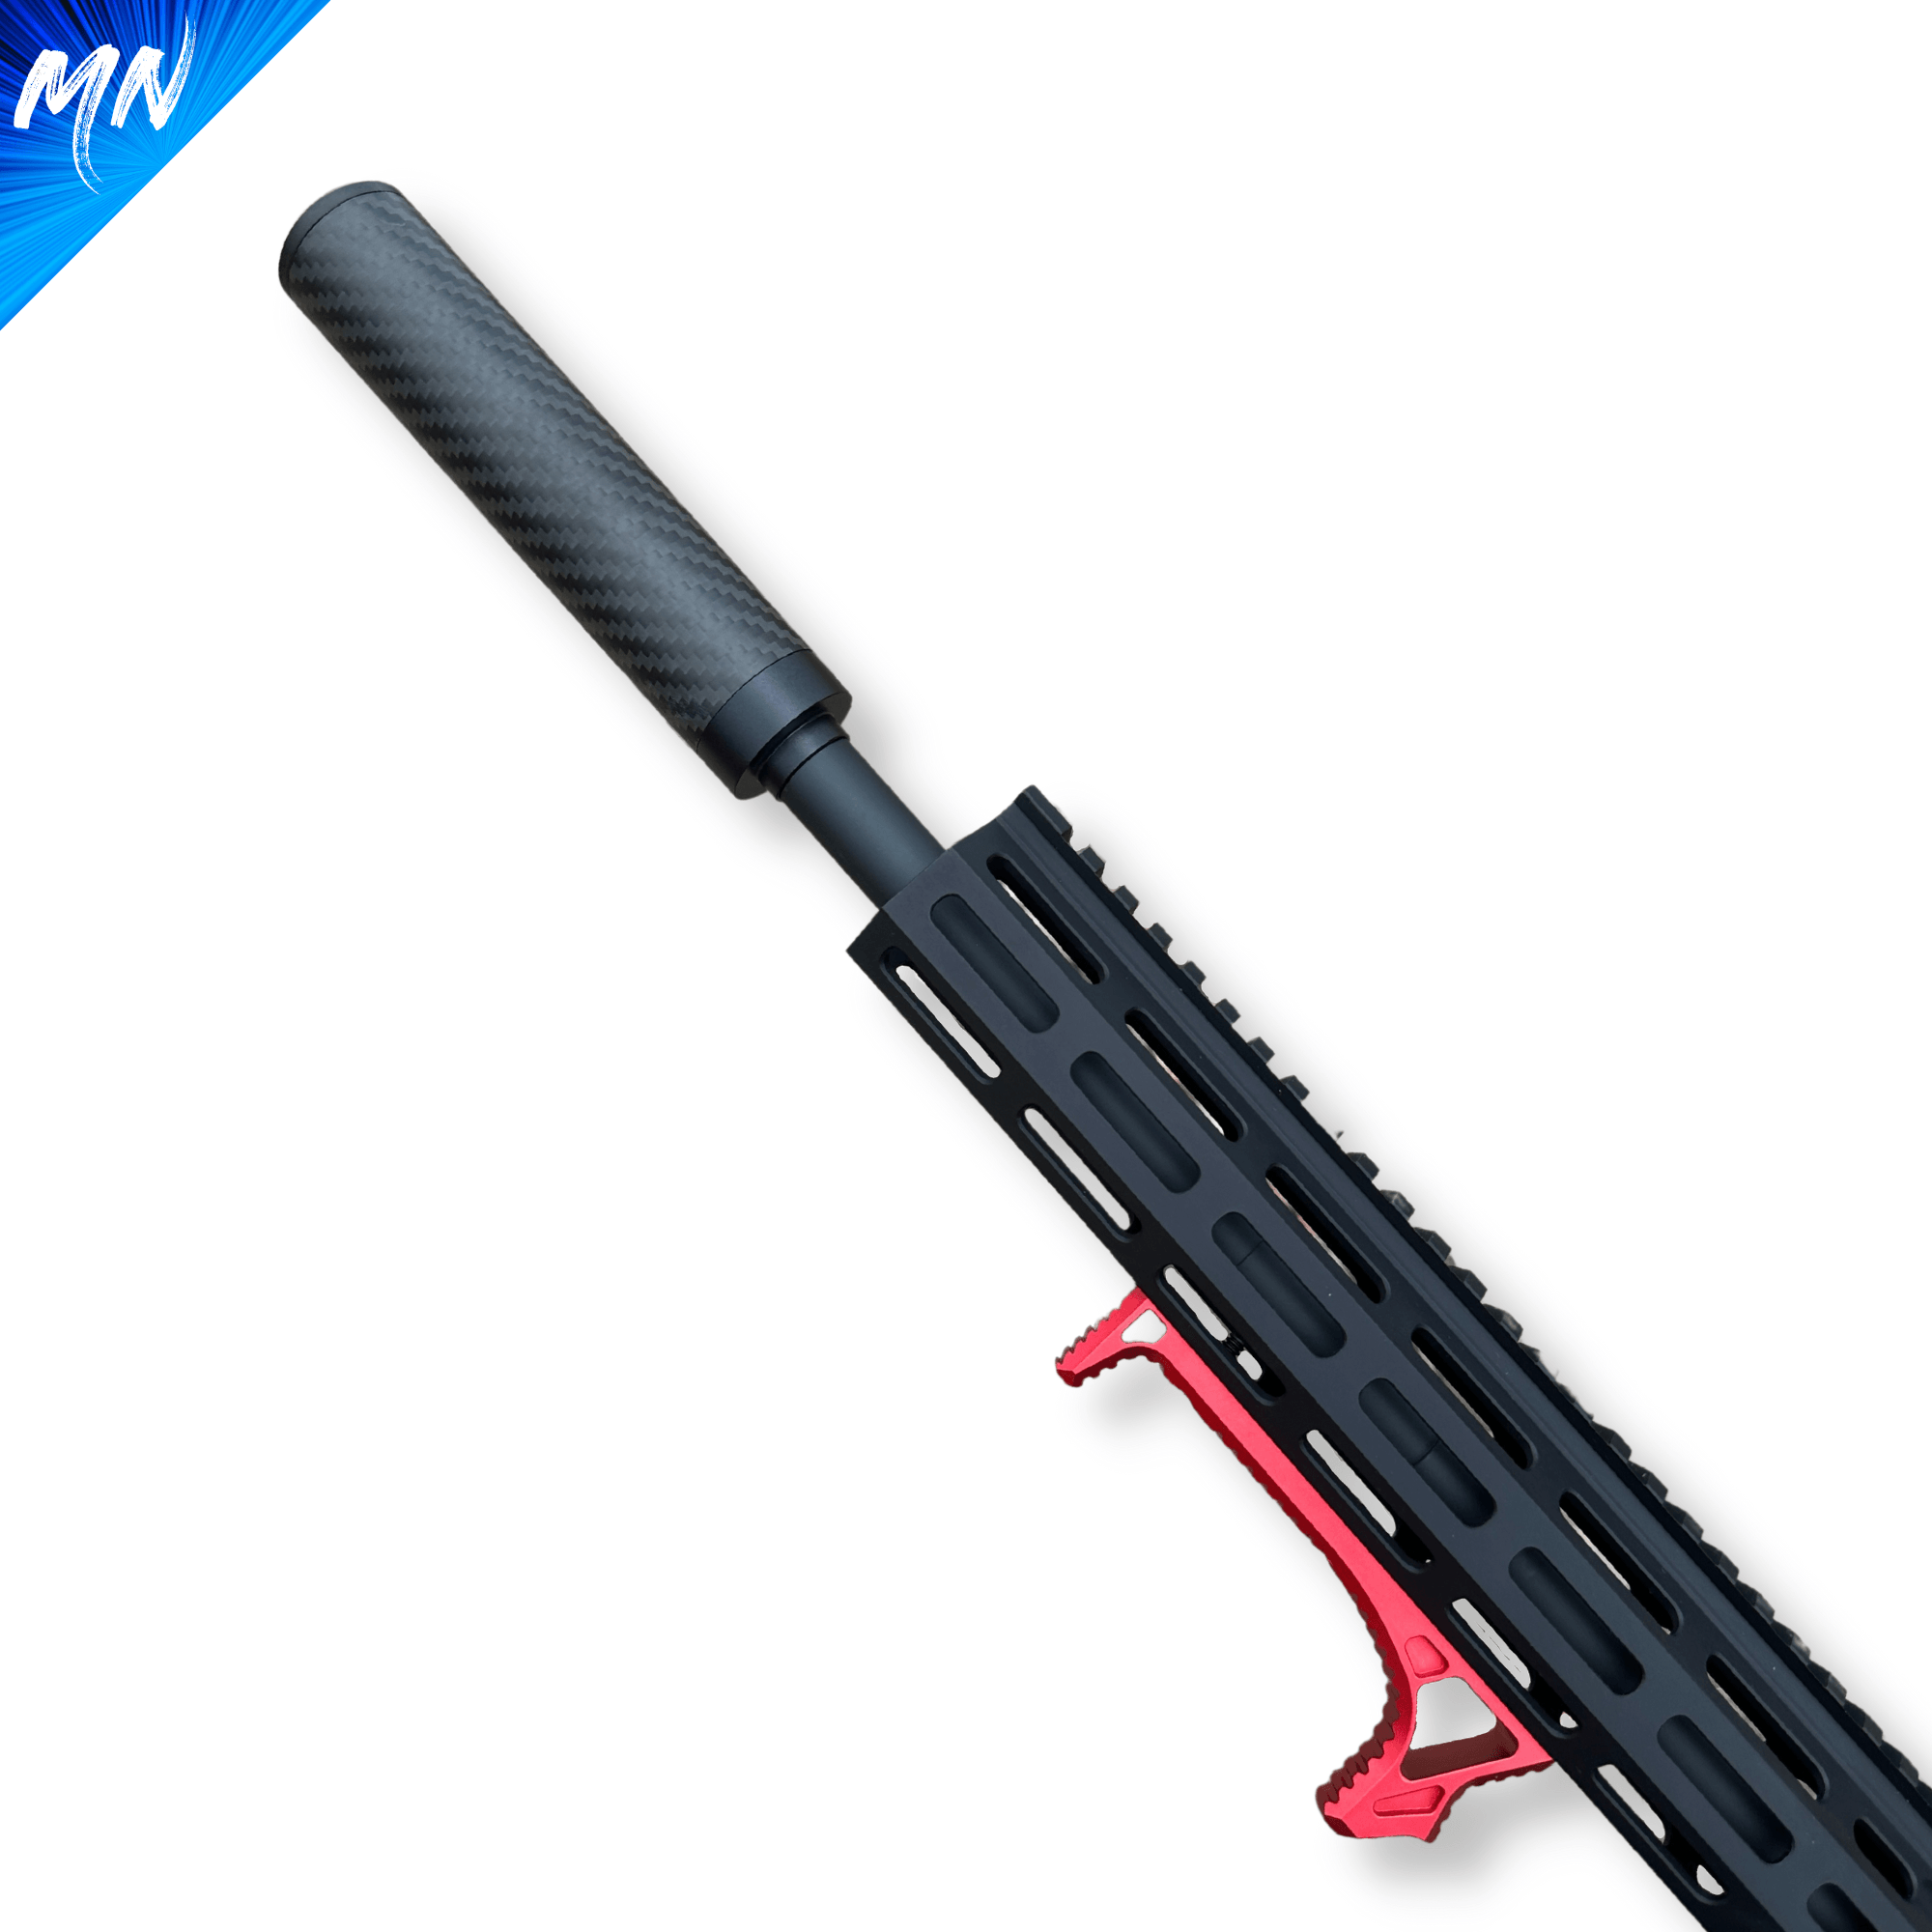 Experience unmatched performance with the Minnesota Airsoft Gen 3 Phantom Carbon Fiber Airsoft Suppressor - the perfect accessory for your custom built HPA rifle like the Wolverine MTW